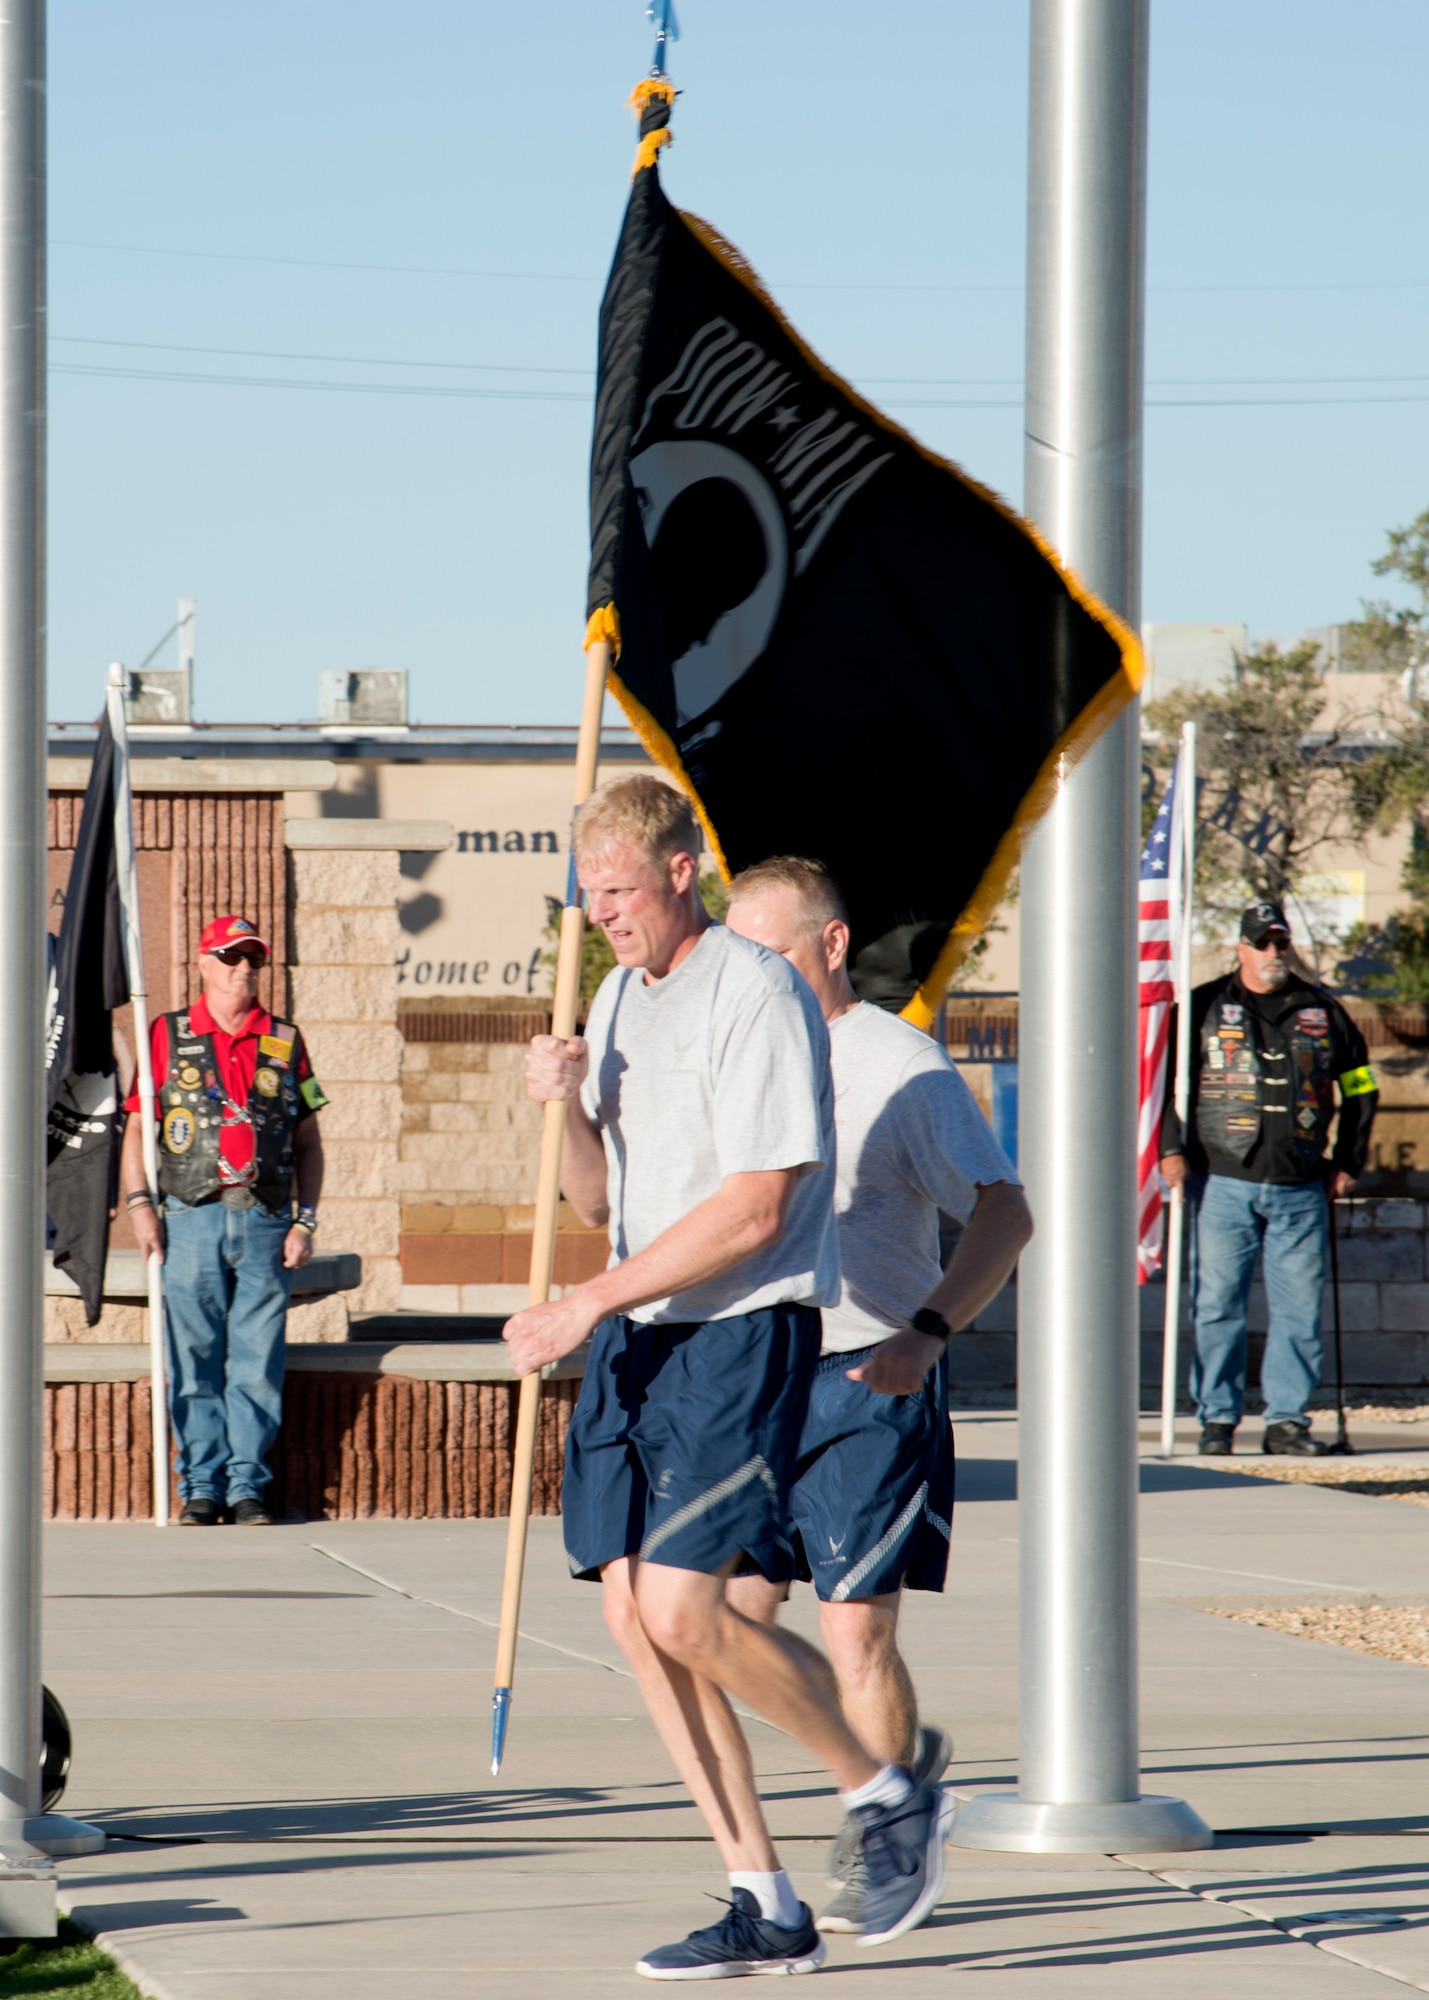 Chief Master Sgt. Timothy Wieser, 635th Material Maintenance Group Chief, runs with the POW/MIA flag during a ceremony at Heritage Park on Holloman Air Force Base, N.M., Sept. 21. The ceremony, in rememberance of prisoners-of-war and those still missing-in-action, was part of Holloman's POW/MIA commemoration. (U.S. Air Force photo by Airman 1st Class Kindra Stewart)